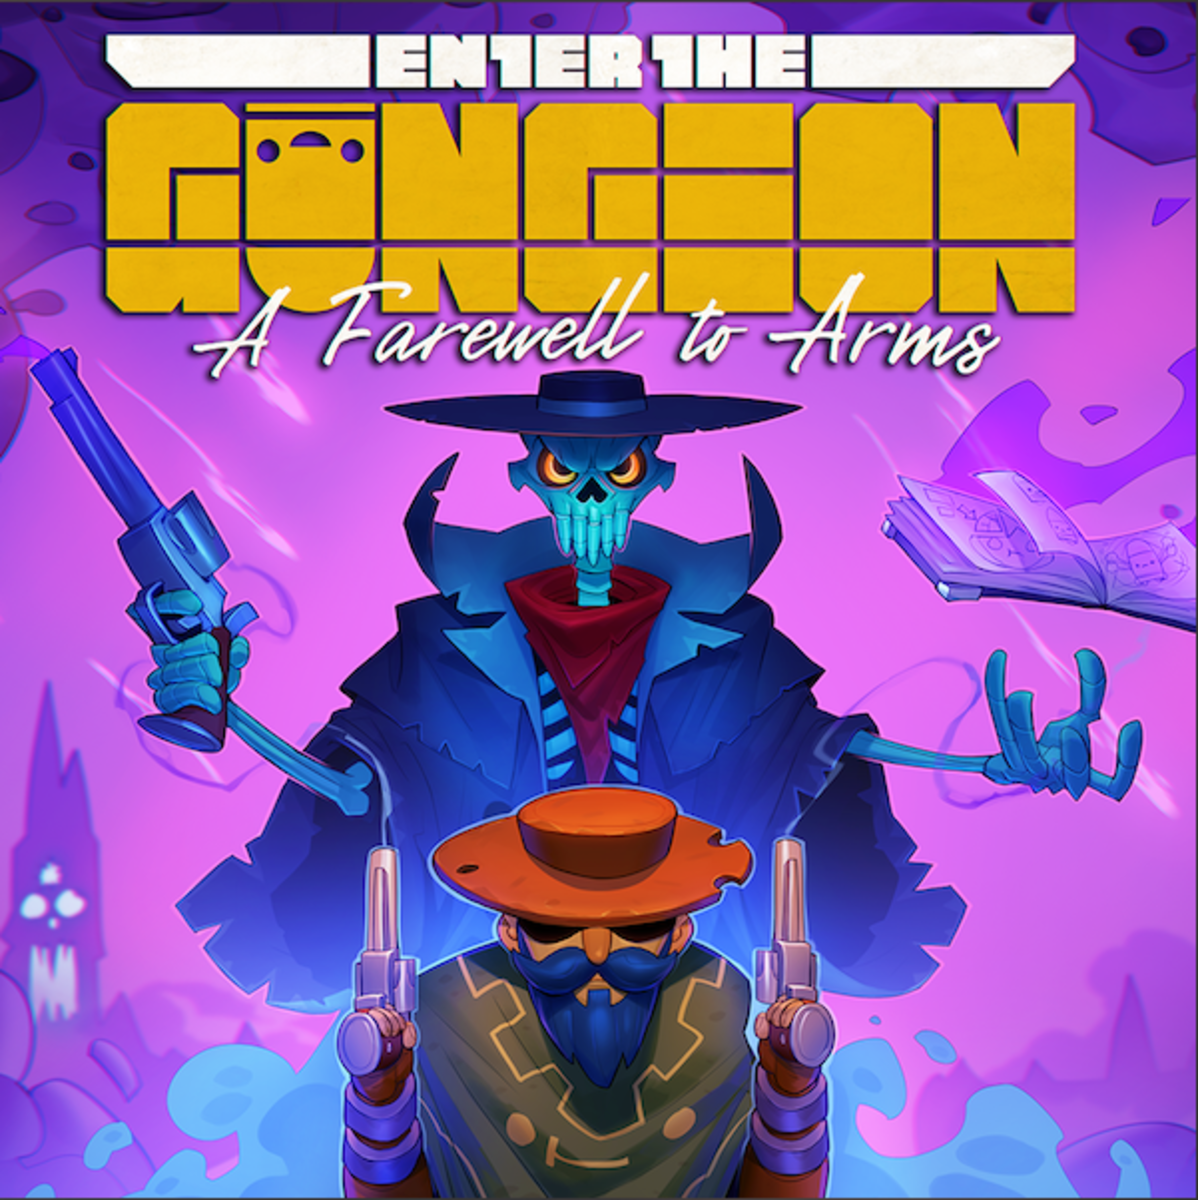 Each character in "Enter the Gangeon" has unique starting items and guns.